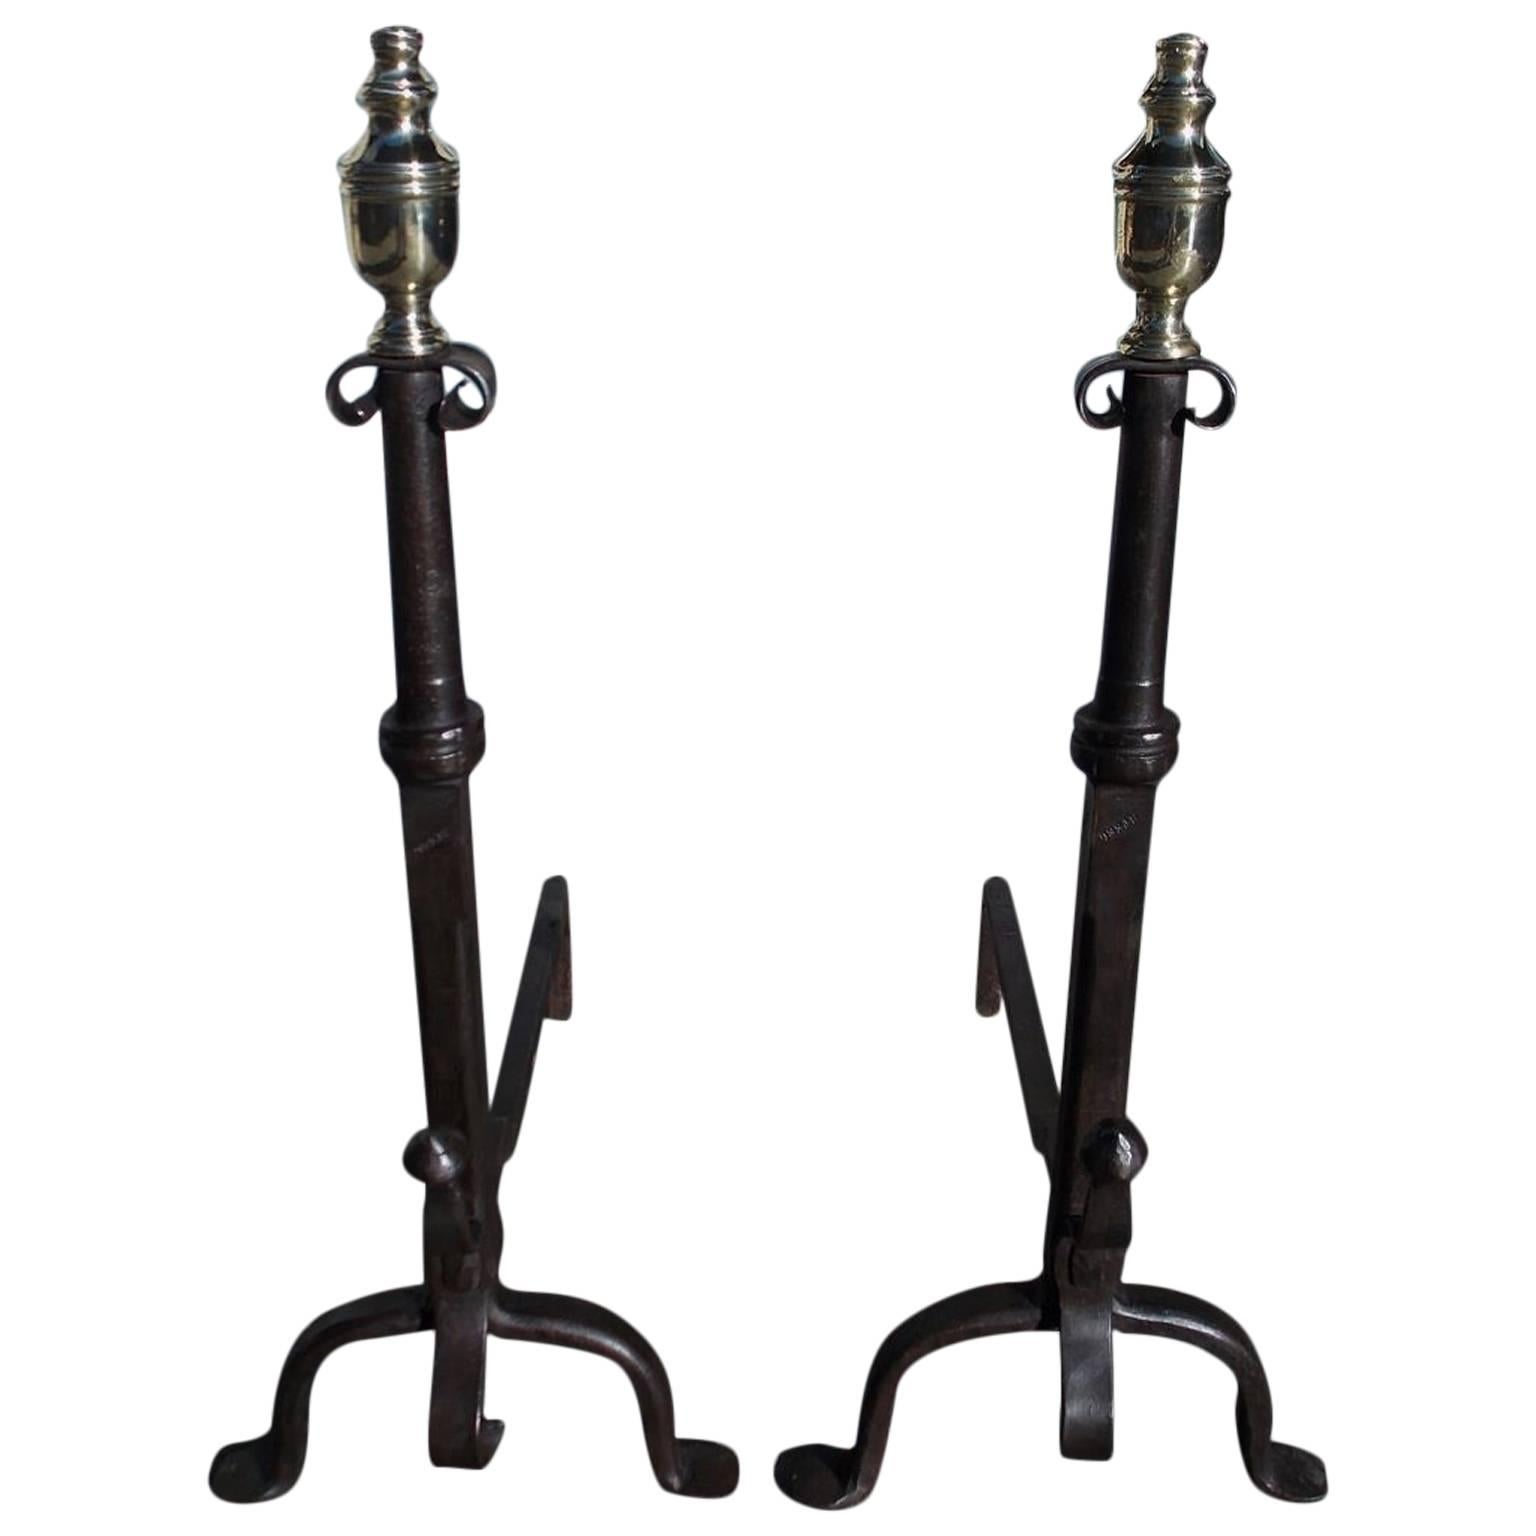 American Wrought iron and Brass Urn Finial Andirons.  Circa 1780